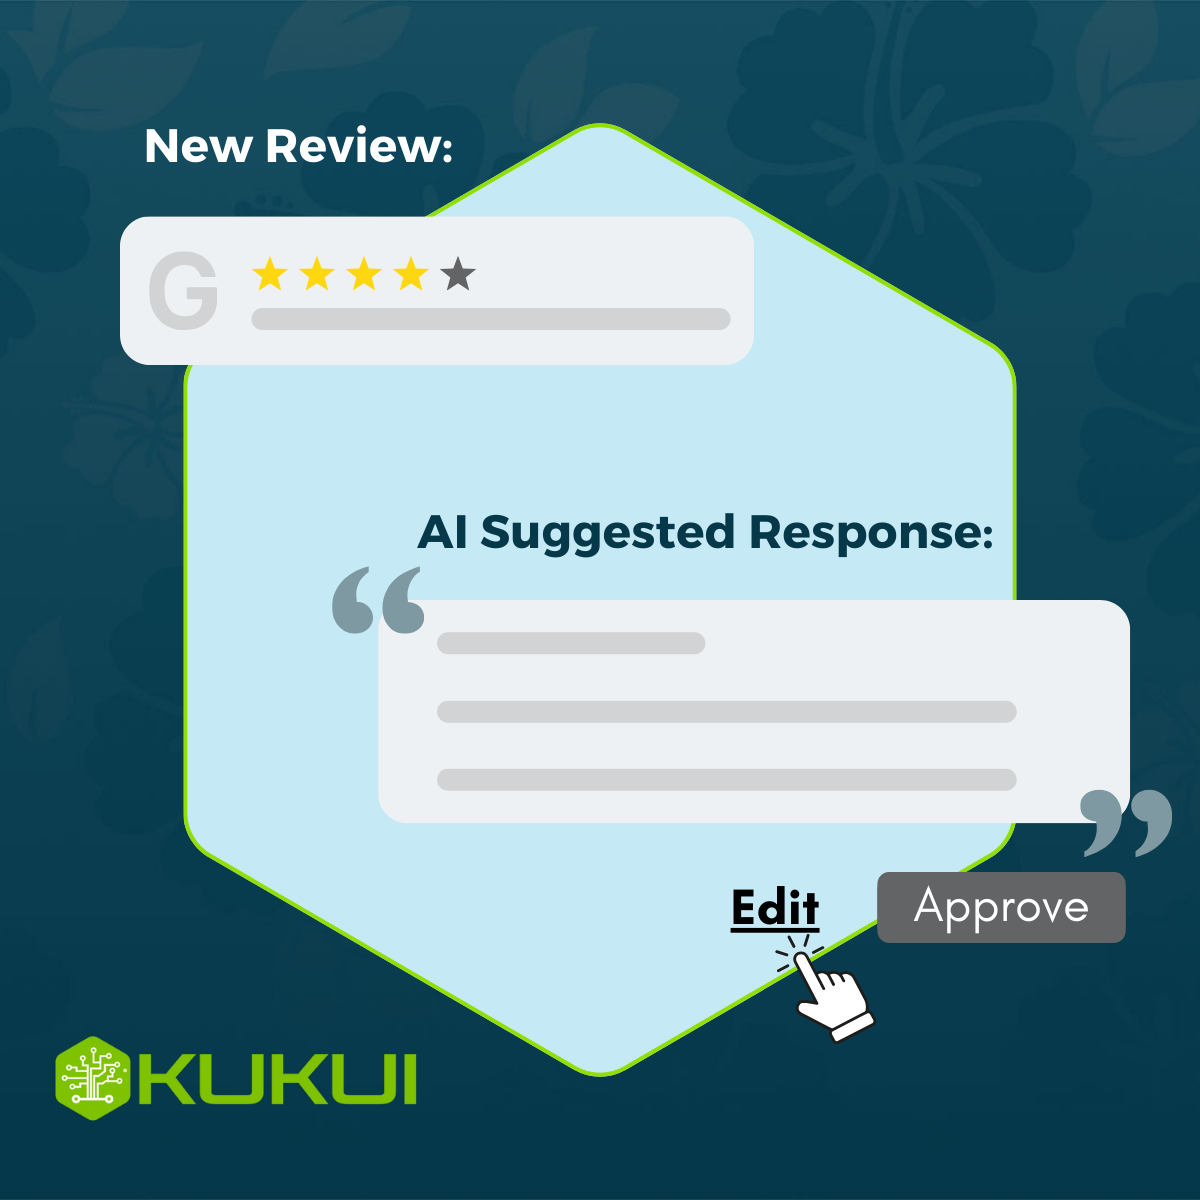 A graphic showing a new review and a suggested response